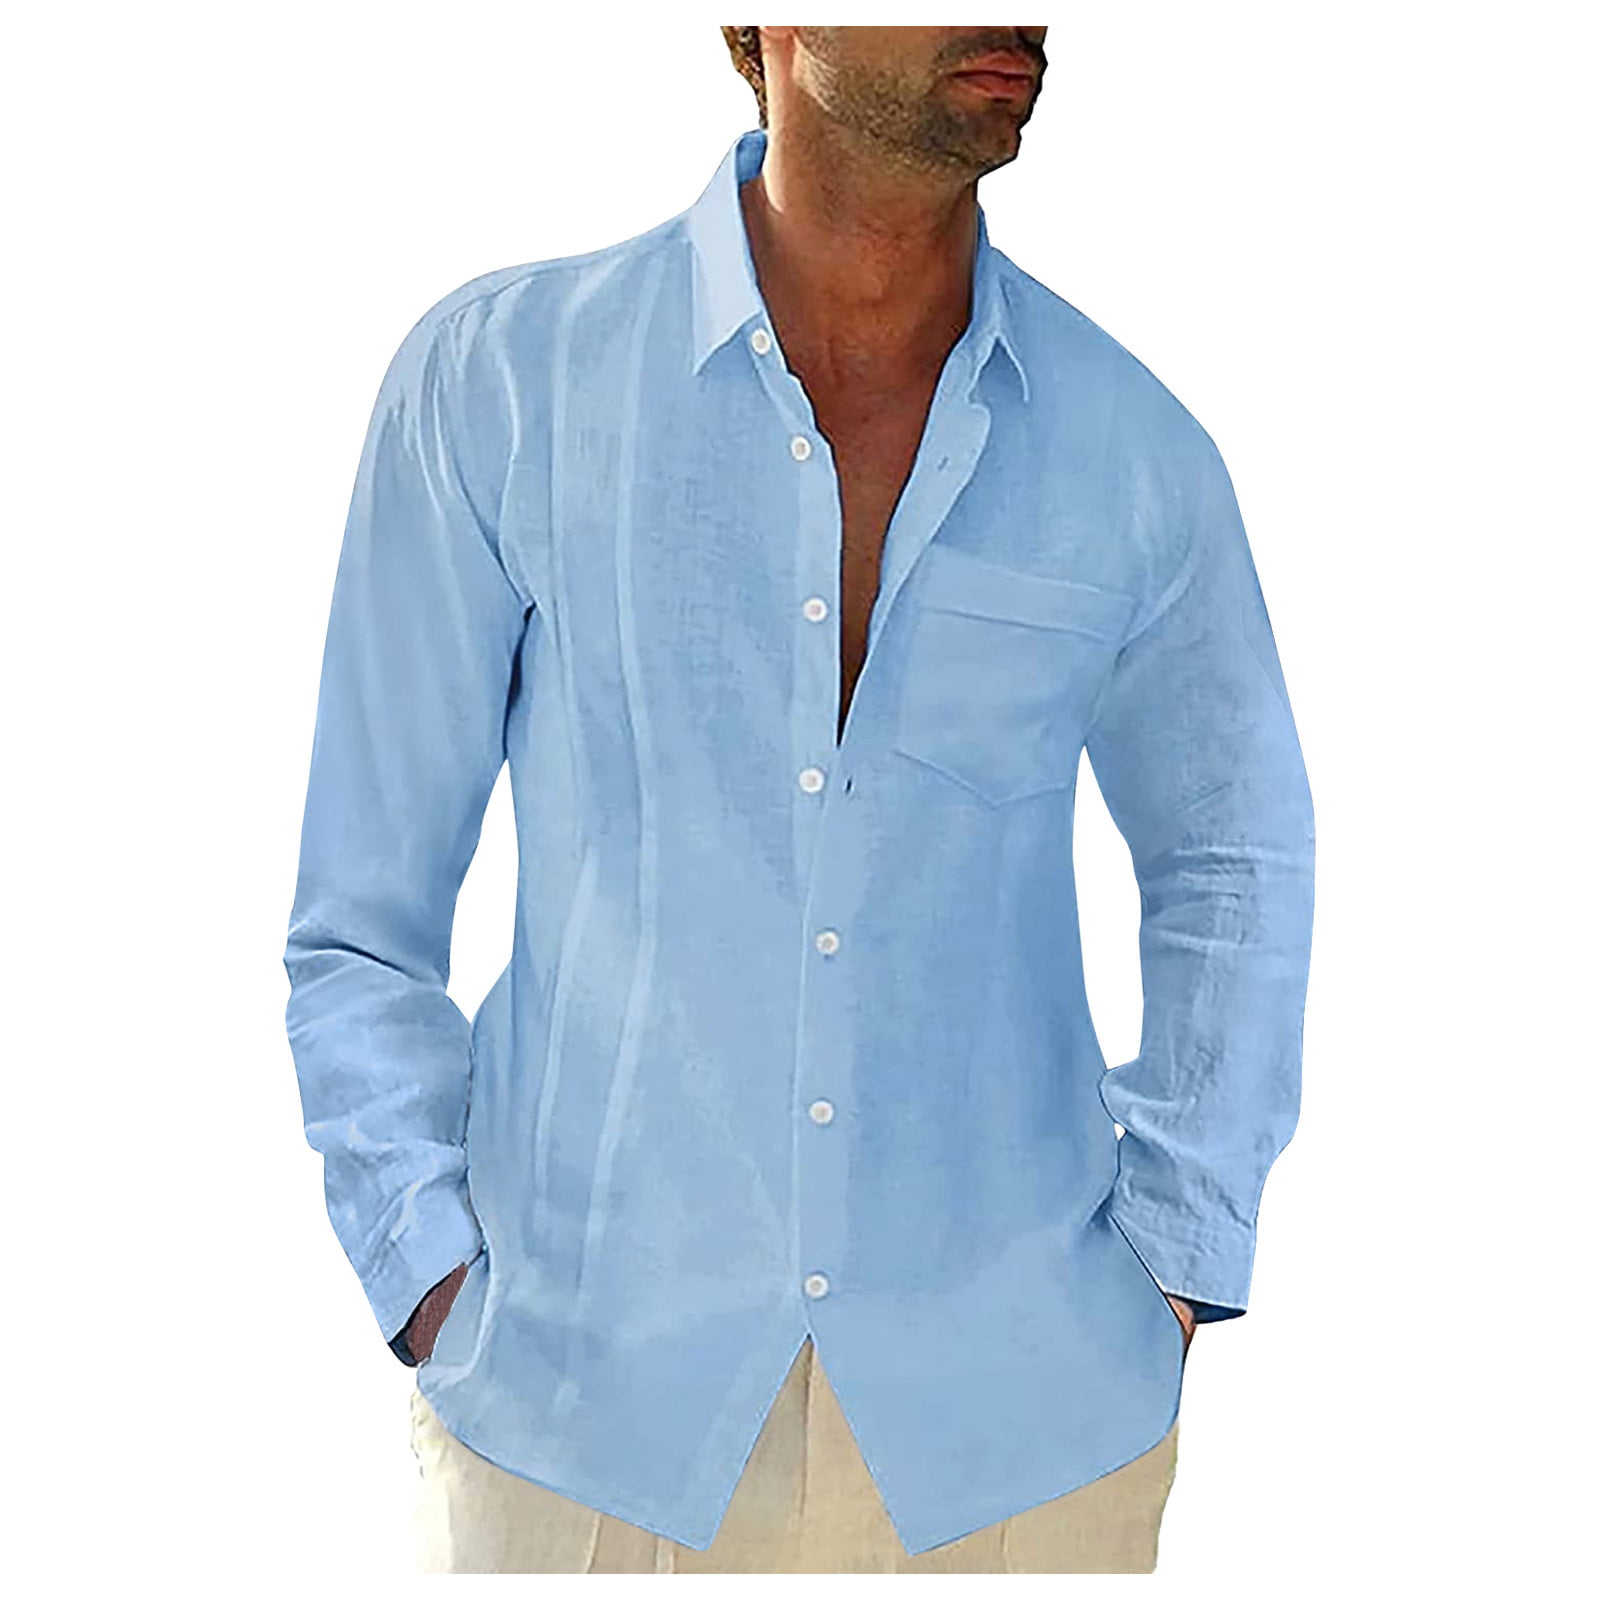 Hurrg Mens Casual Solid Regular Fit Long Sleeve Button Up Oxford Shirt with Pocket 